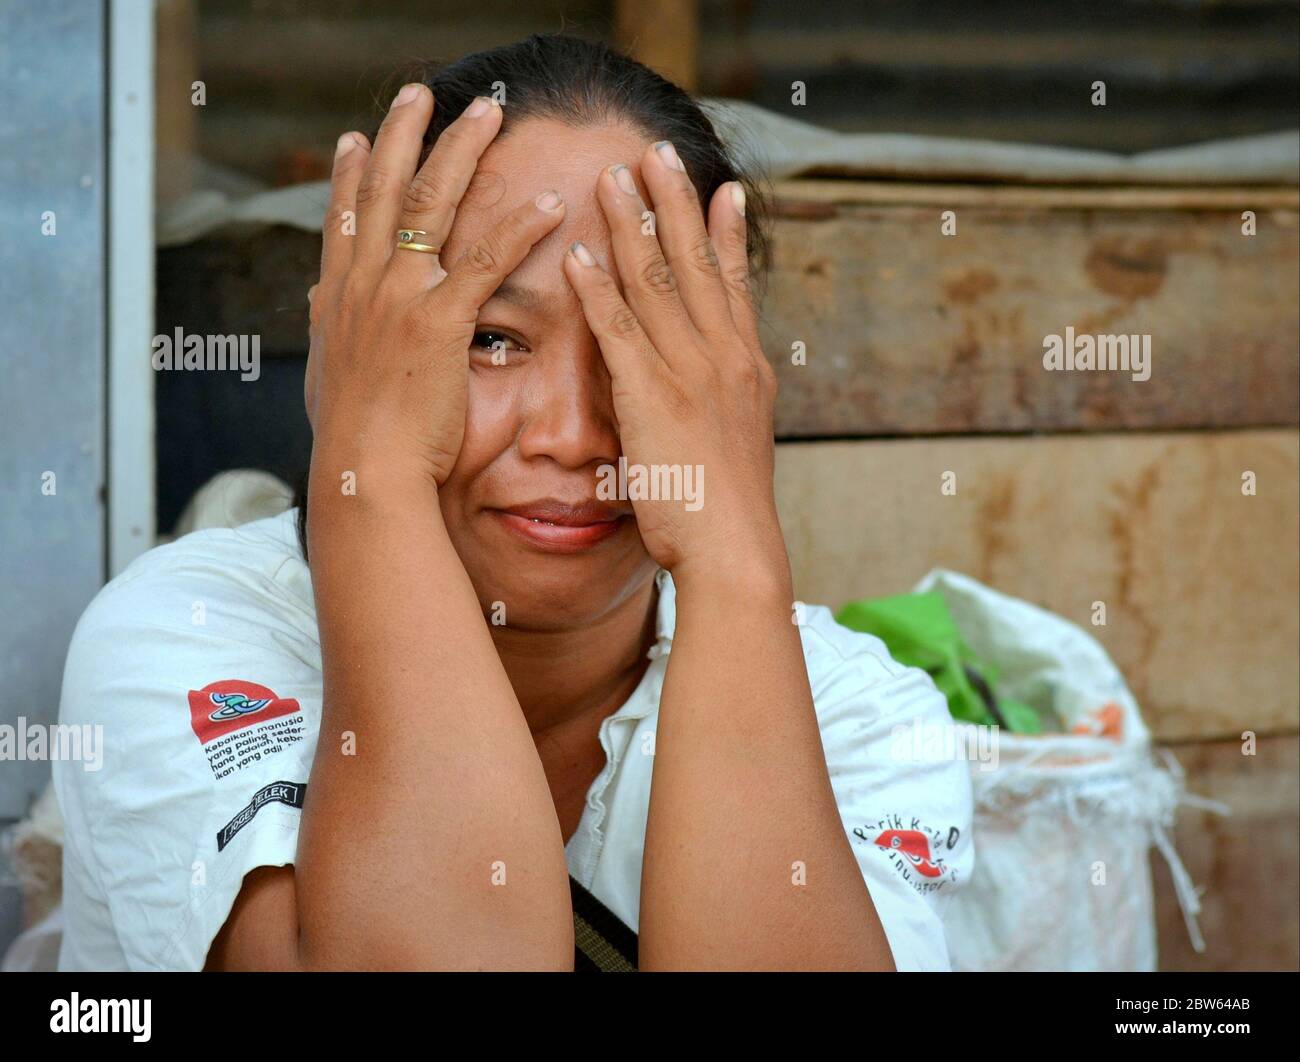 Flirting mature Indonesian Javanese woman pretends to cover her eyes with both hands and mocks the photographer. Stock Photo